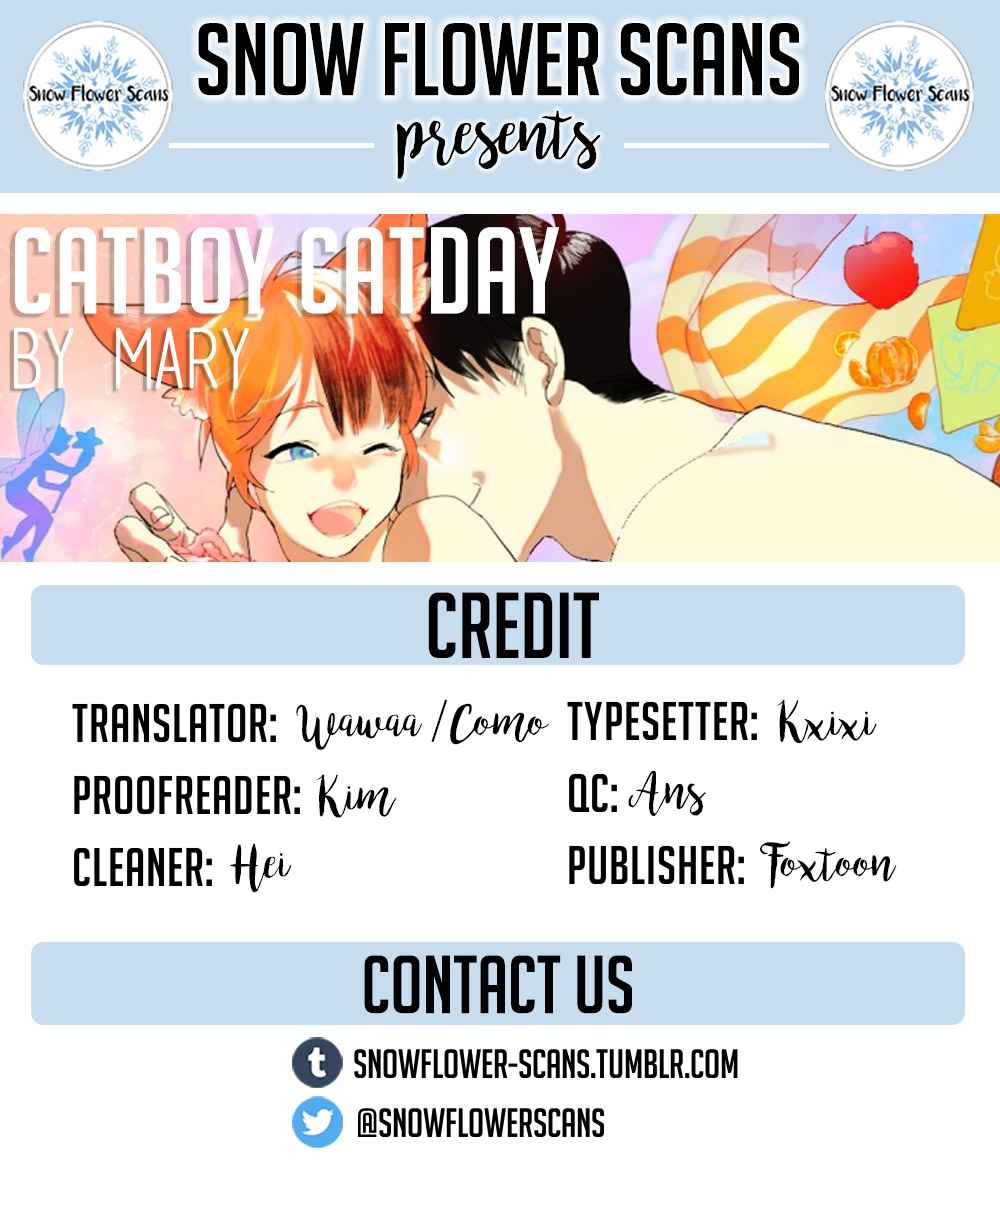 Catboy Catday Ch. 40 Conflict